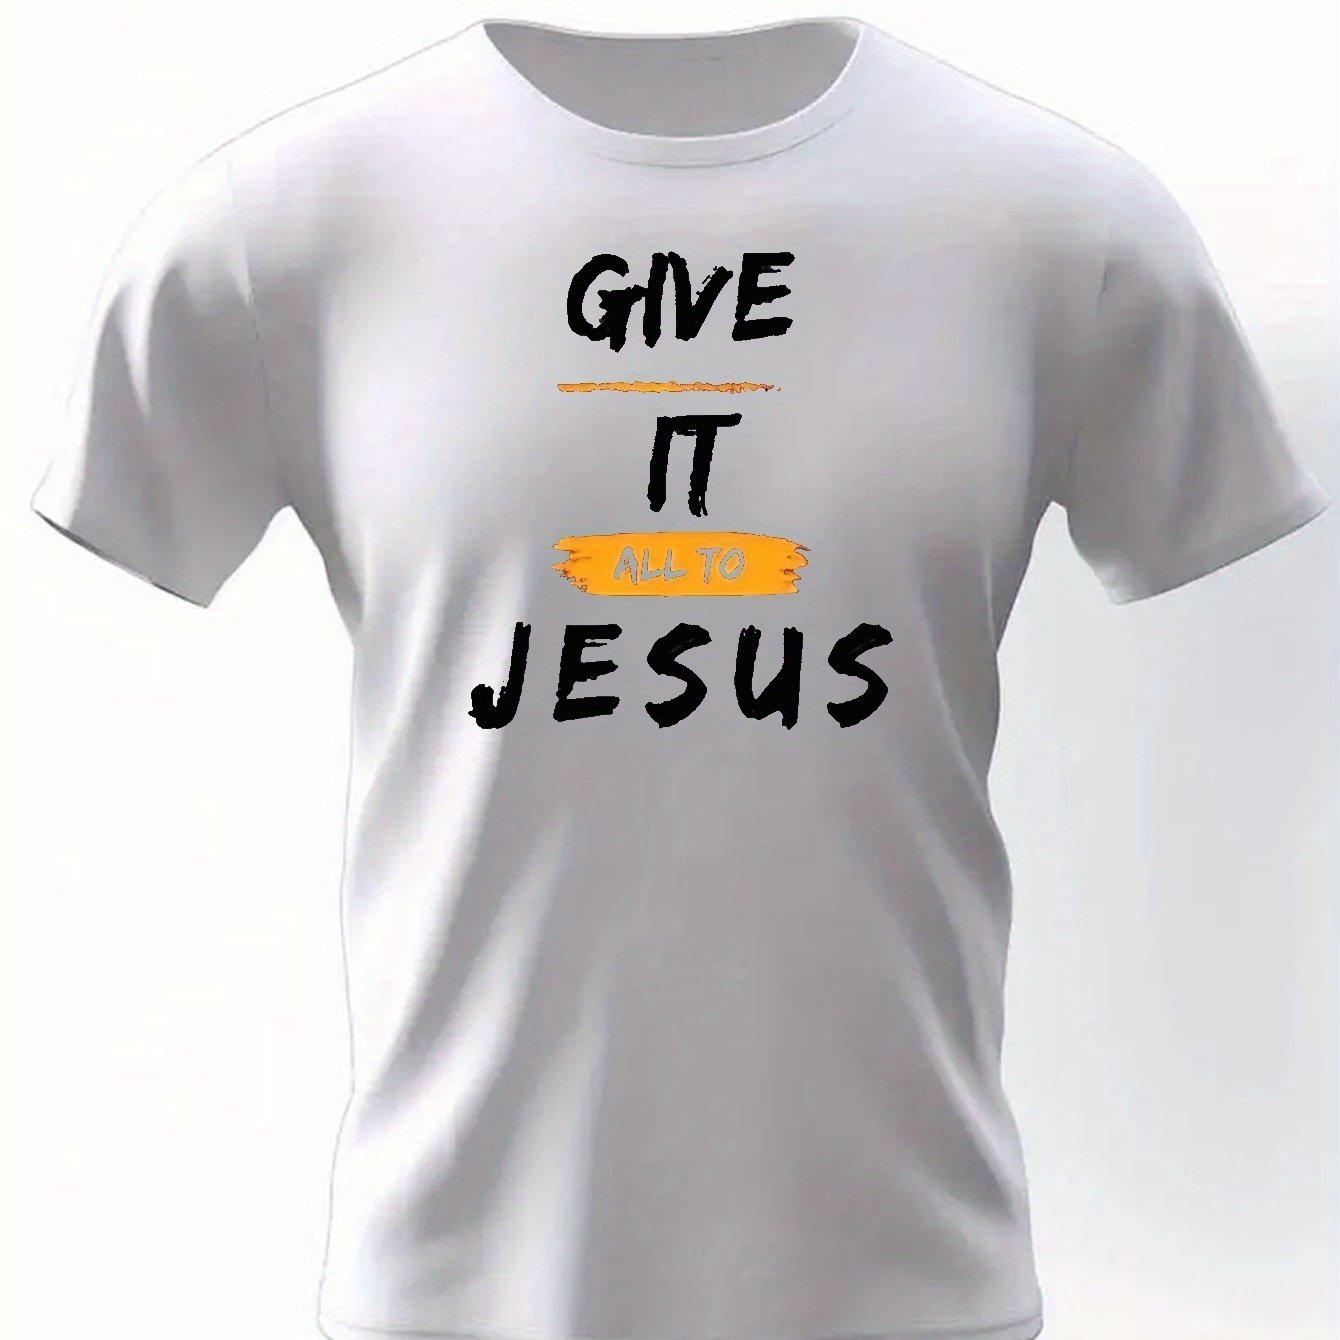 Give All To Jesus Men's Christian T-shirt claimedbygoddesigns